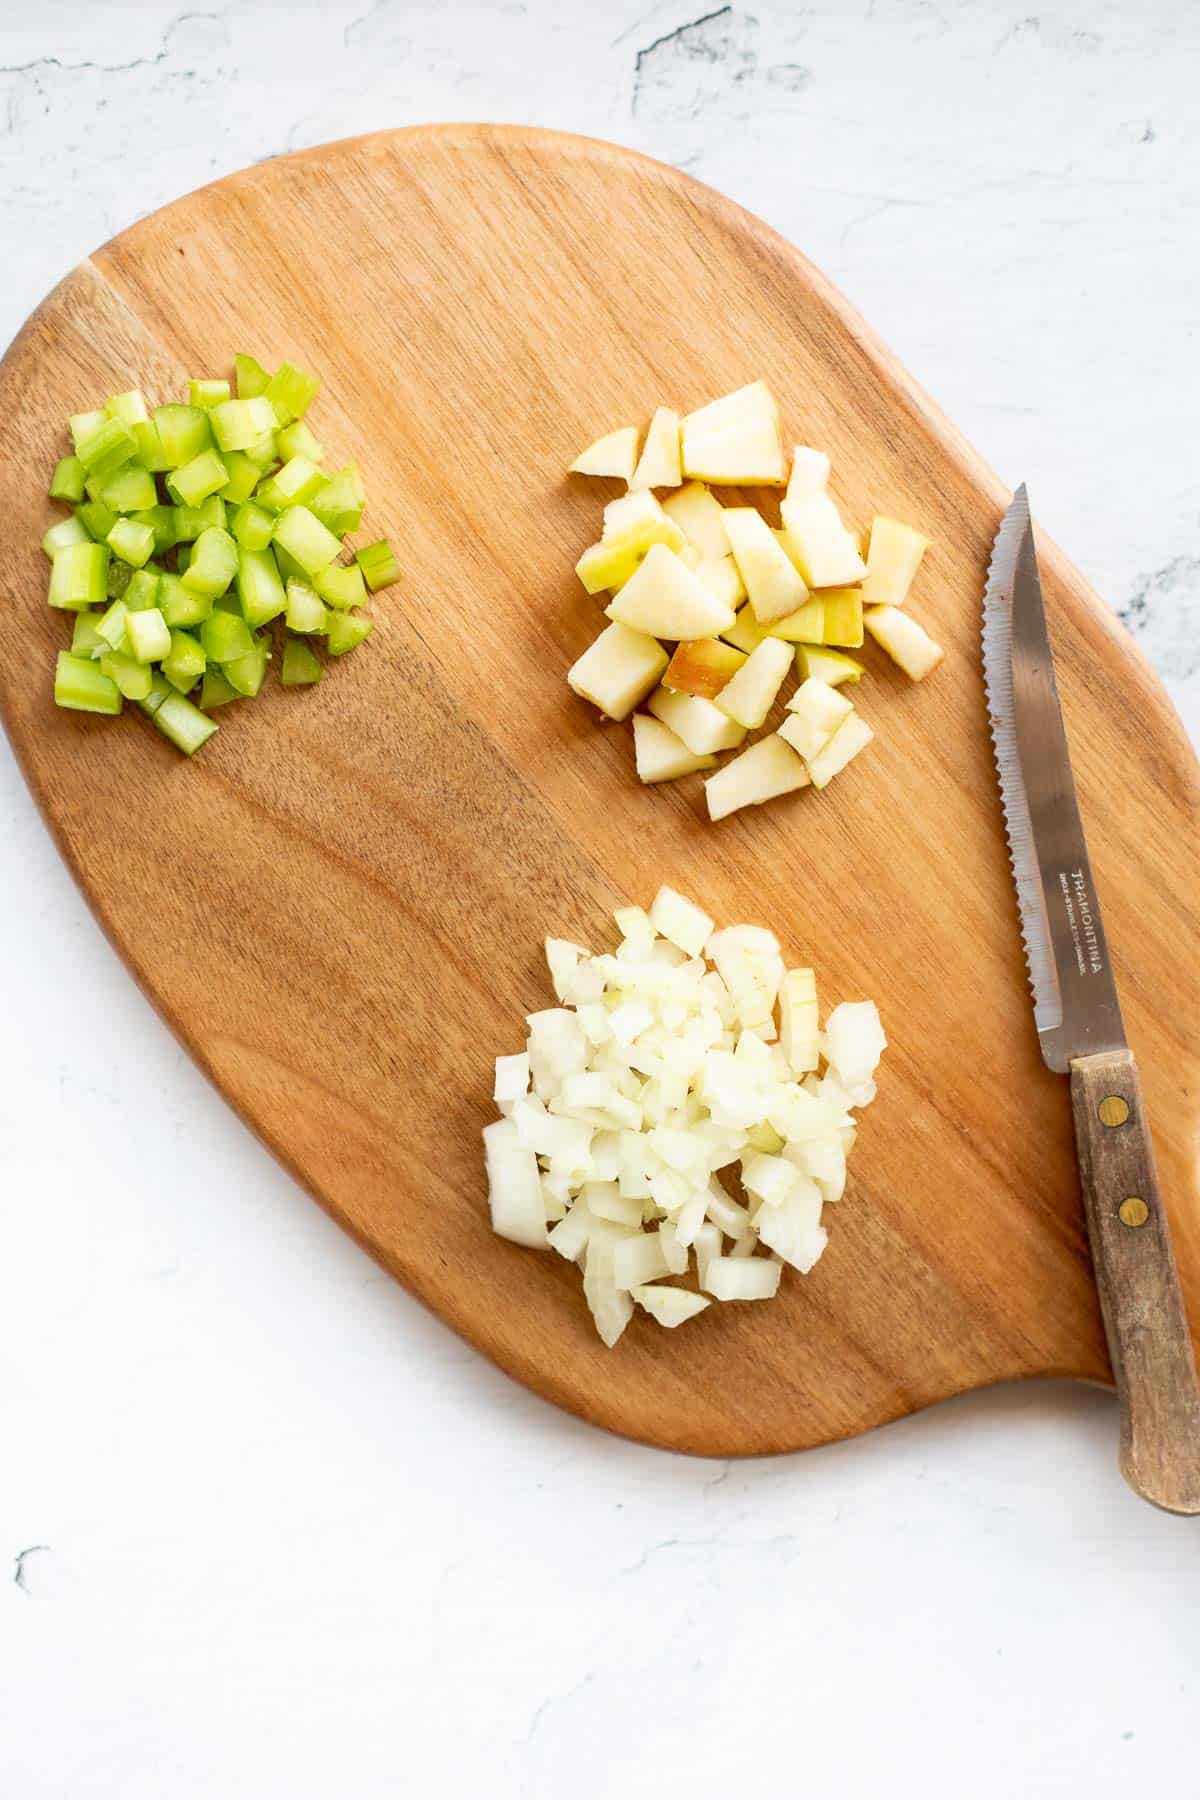 chopped celery, onions, and apples on a wooden cutting board.